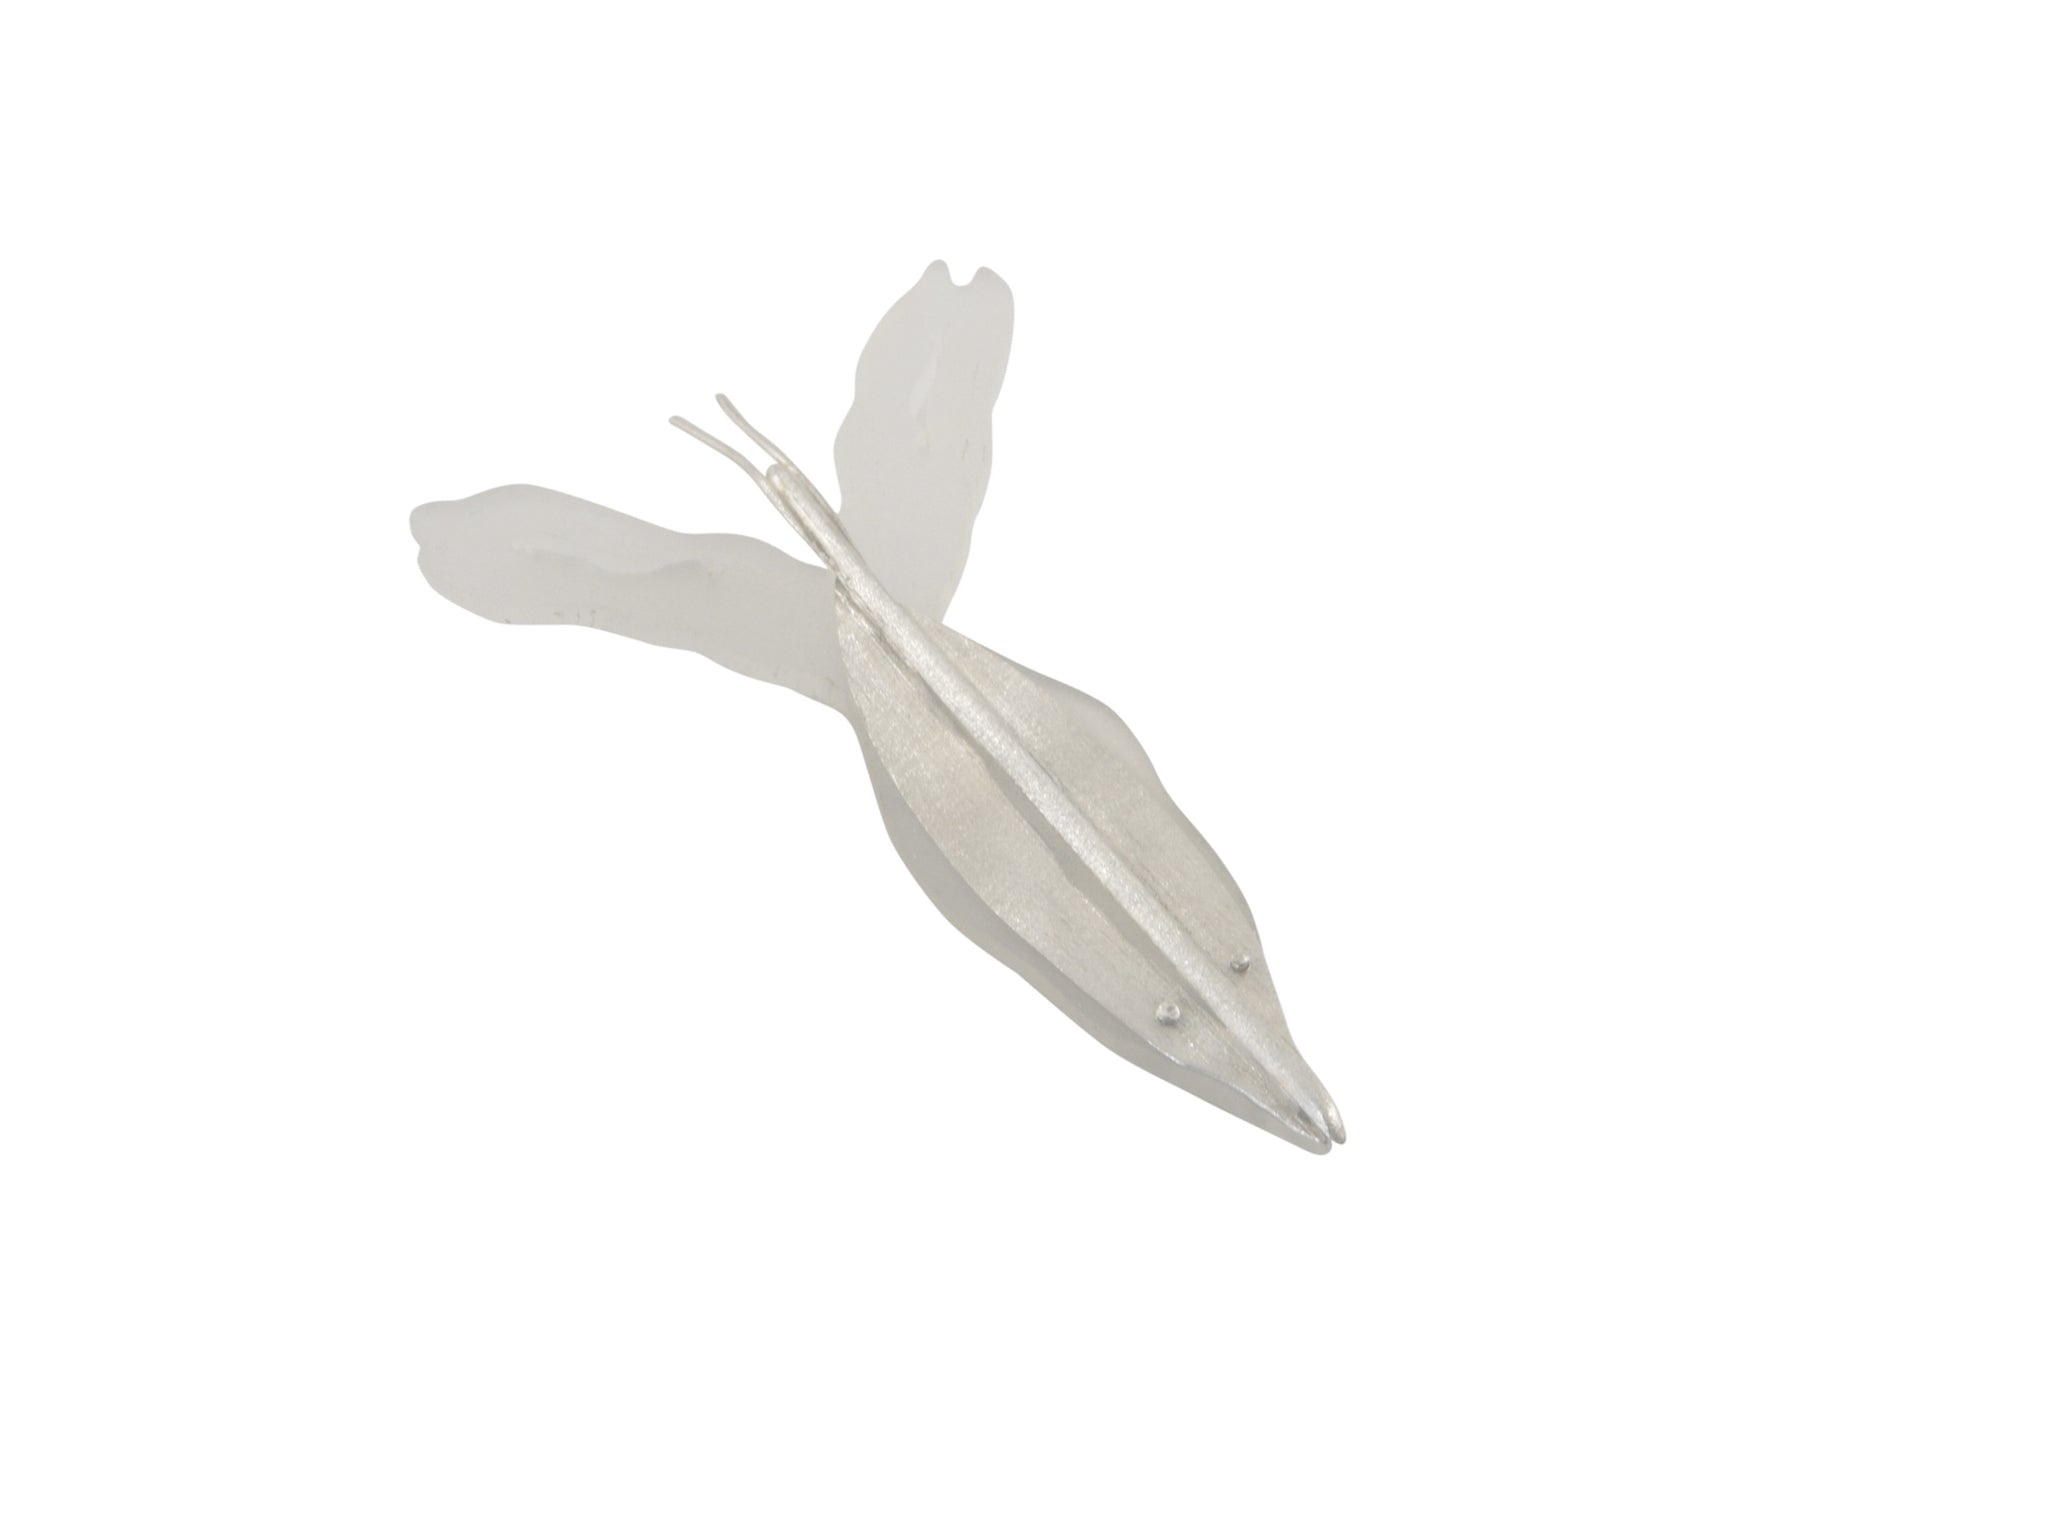 Sea butterfly brooch by janine combes contemporary jeweller